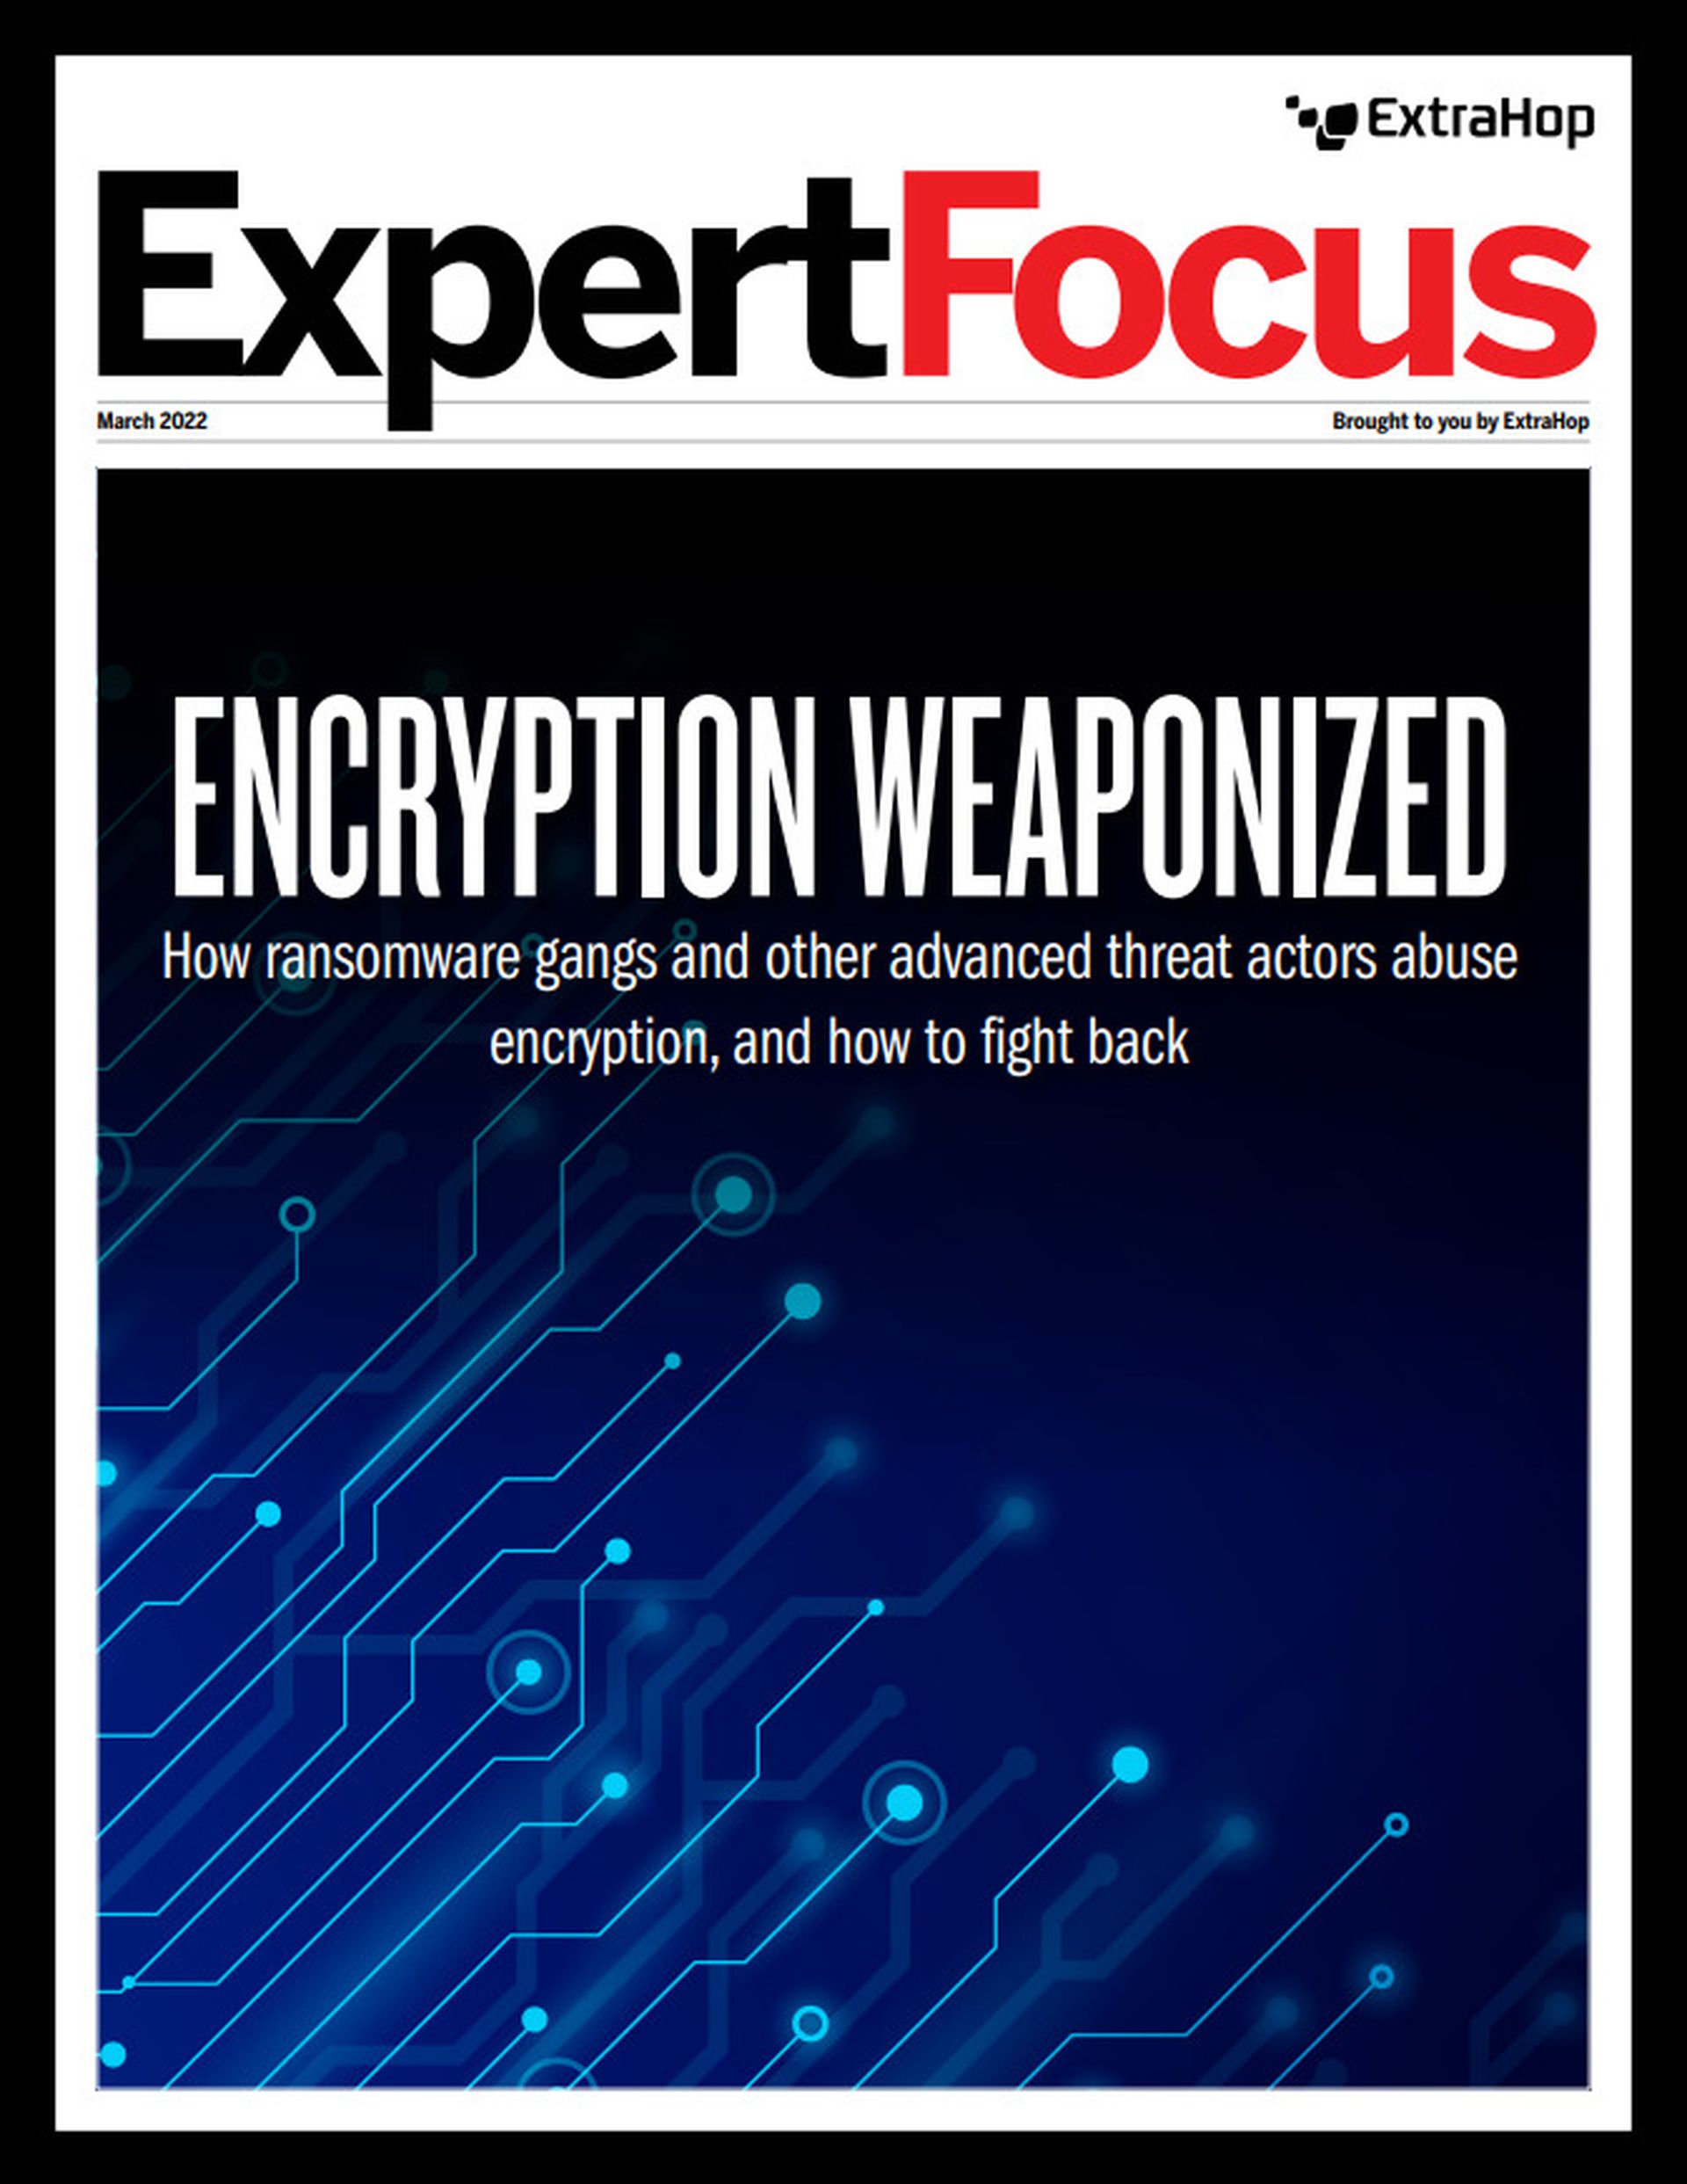 Encryption weaponized: How ransomware gangs use encryption against you, and how to fight back